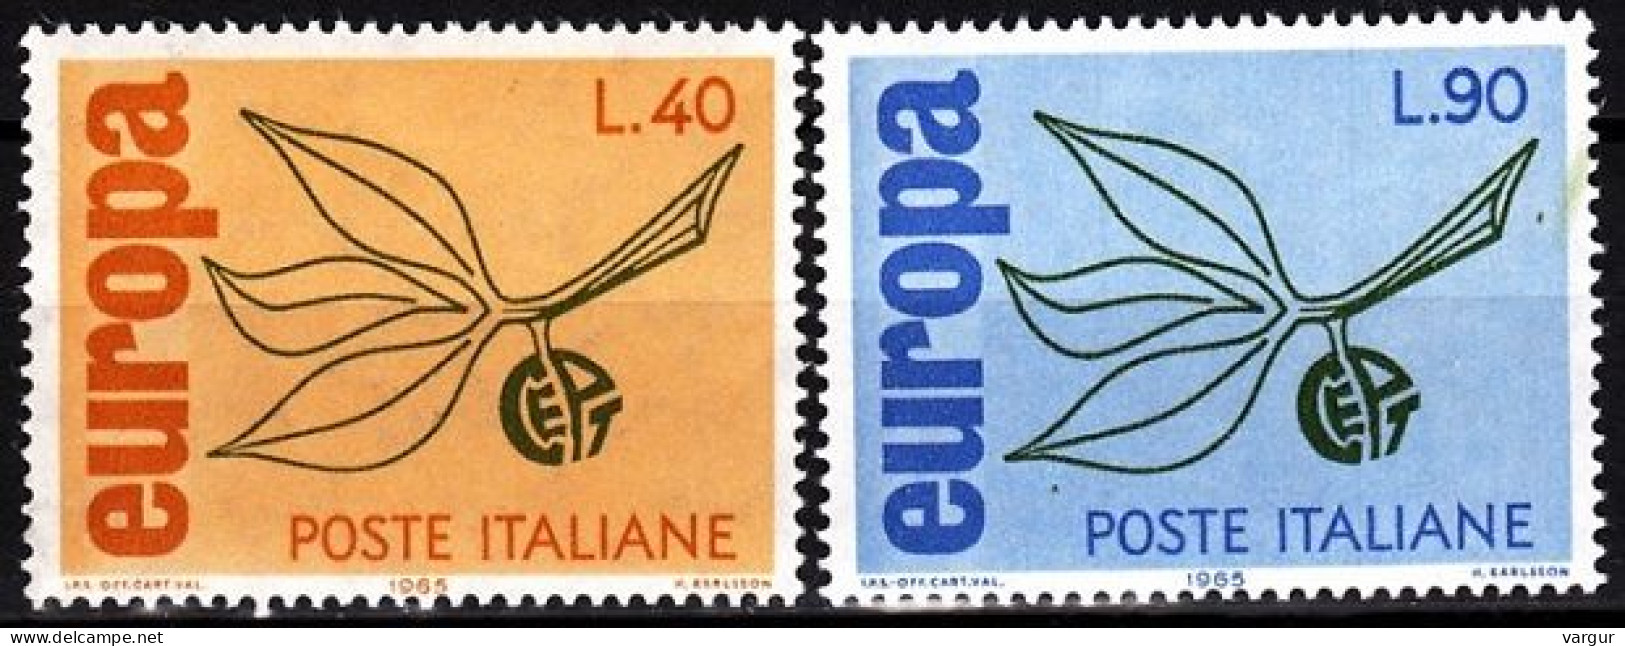 ITALY 1965 EUROPA. Complete Set, MNH - 1965